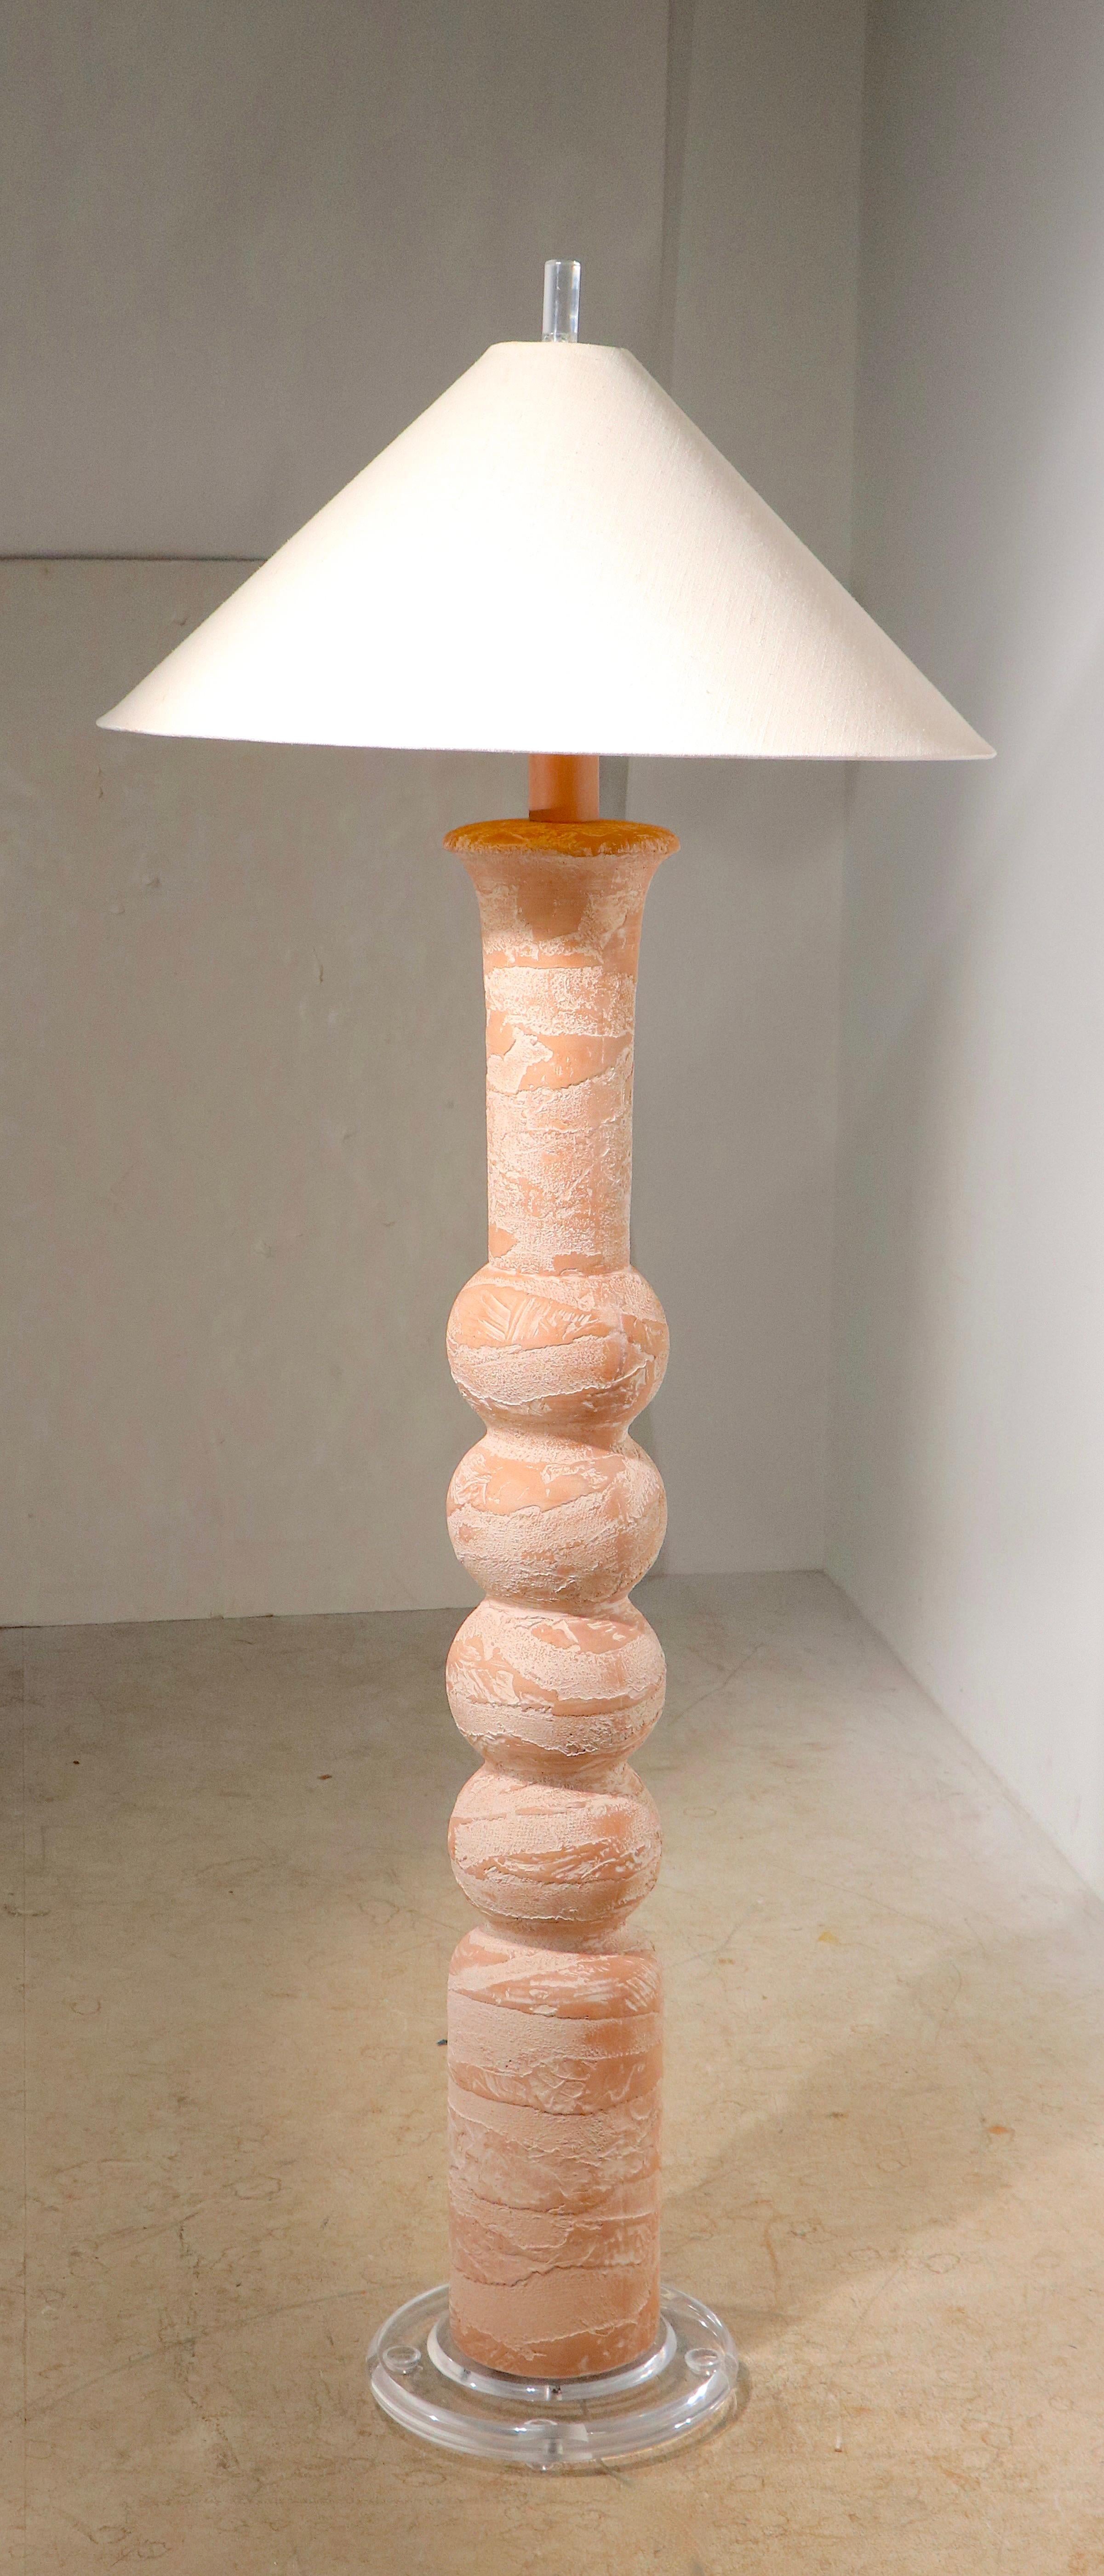 Classic Hollywood Regency Art Deco Revival Post Modern plaster lamp, with textured coral colored vertical center post, with a thick clear lucite base, lucite finial, and original cone form shade. Quintessential voguish 1980's chic style, exceptional